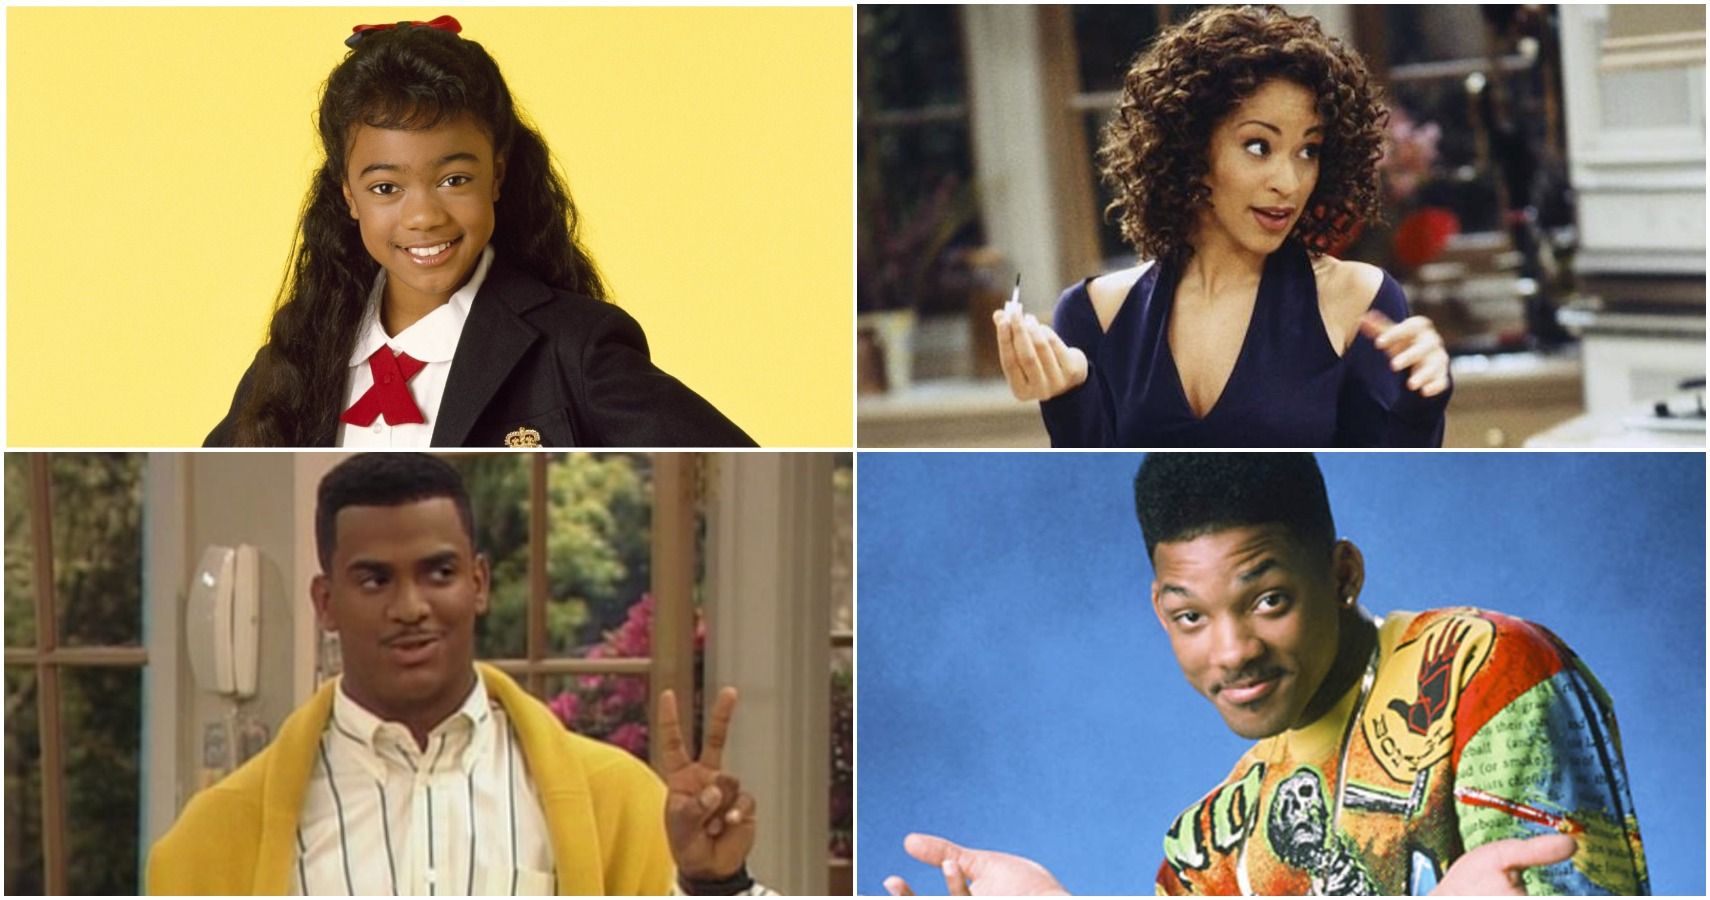 Fresh Prince Of Bel Air Which Character Are You Based On Your Zodiac